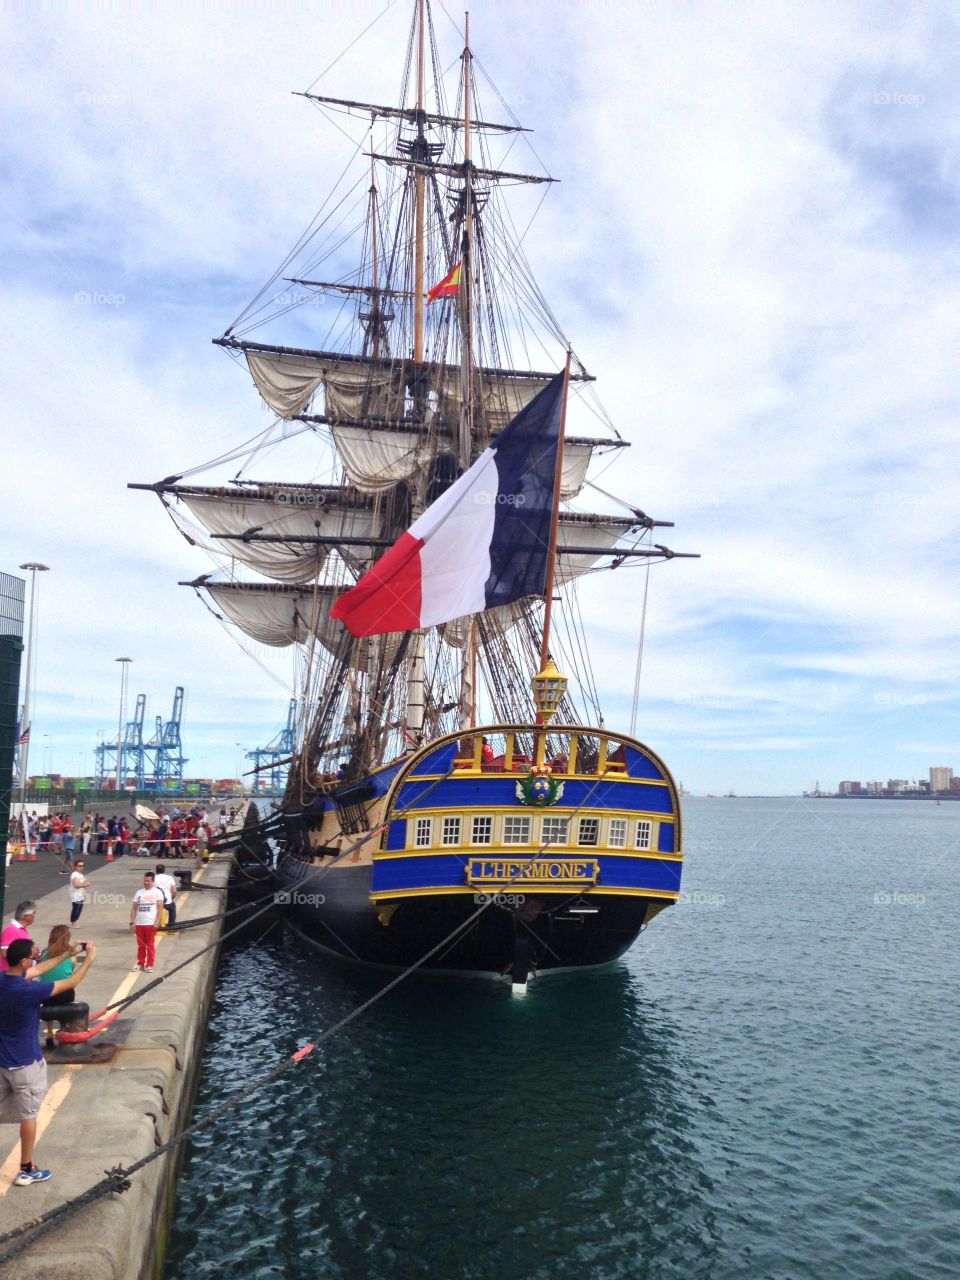 L'Hermion. This French ship helped the USA in the independence war. It's the copy of the original one, and it's now in Canary Islands, in its way to USA from France. Cool!